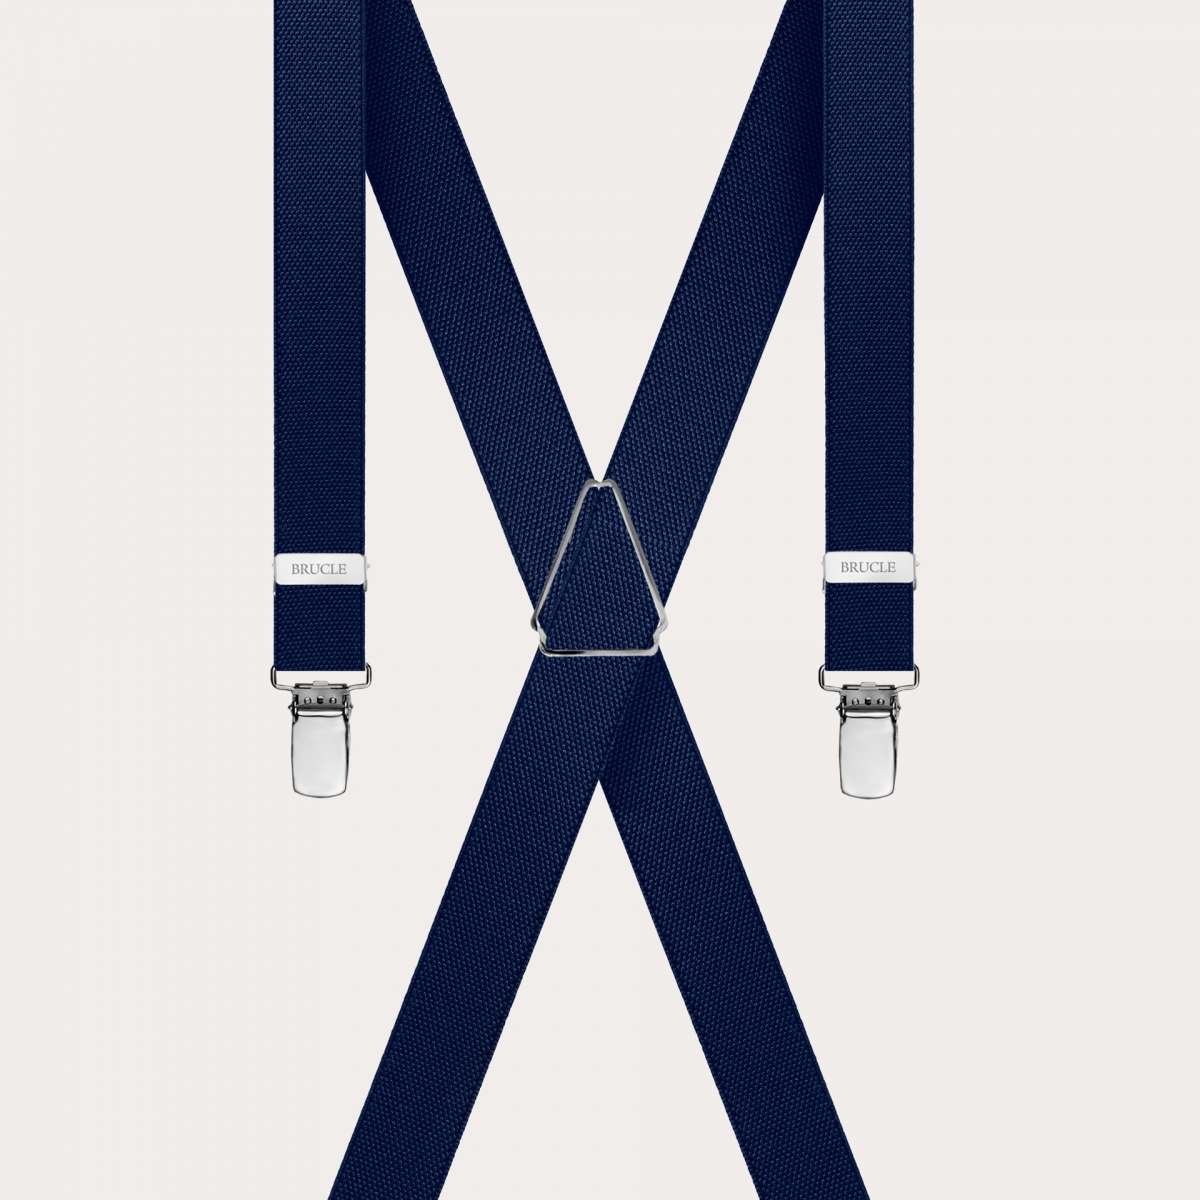 BRUCLE Elegant X-shaped suspenders for kids and teens, navy blue